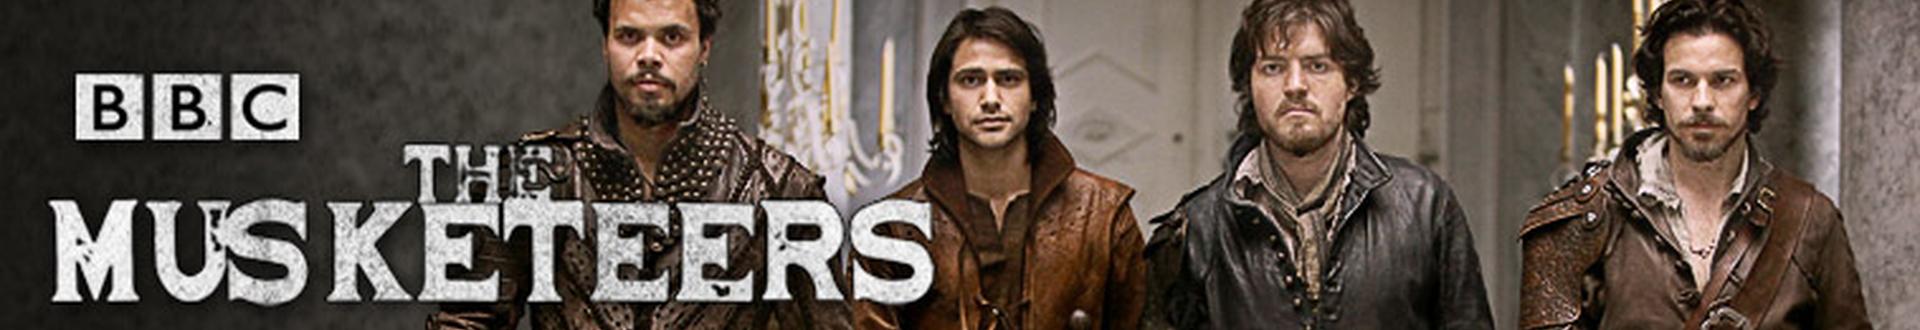 Image illustrative de The Musketeers